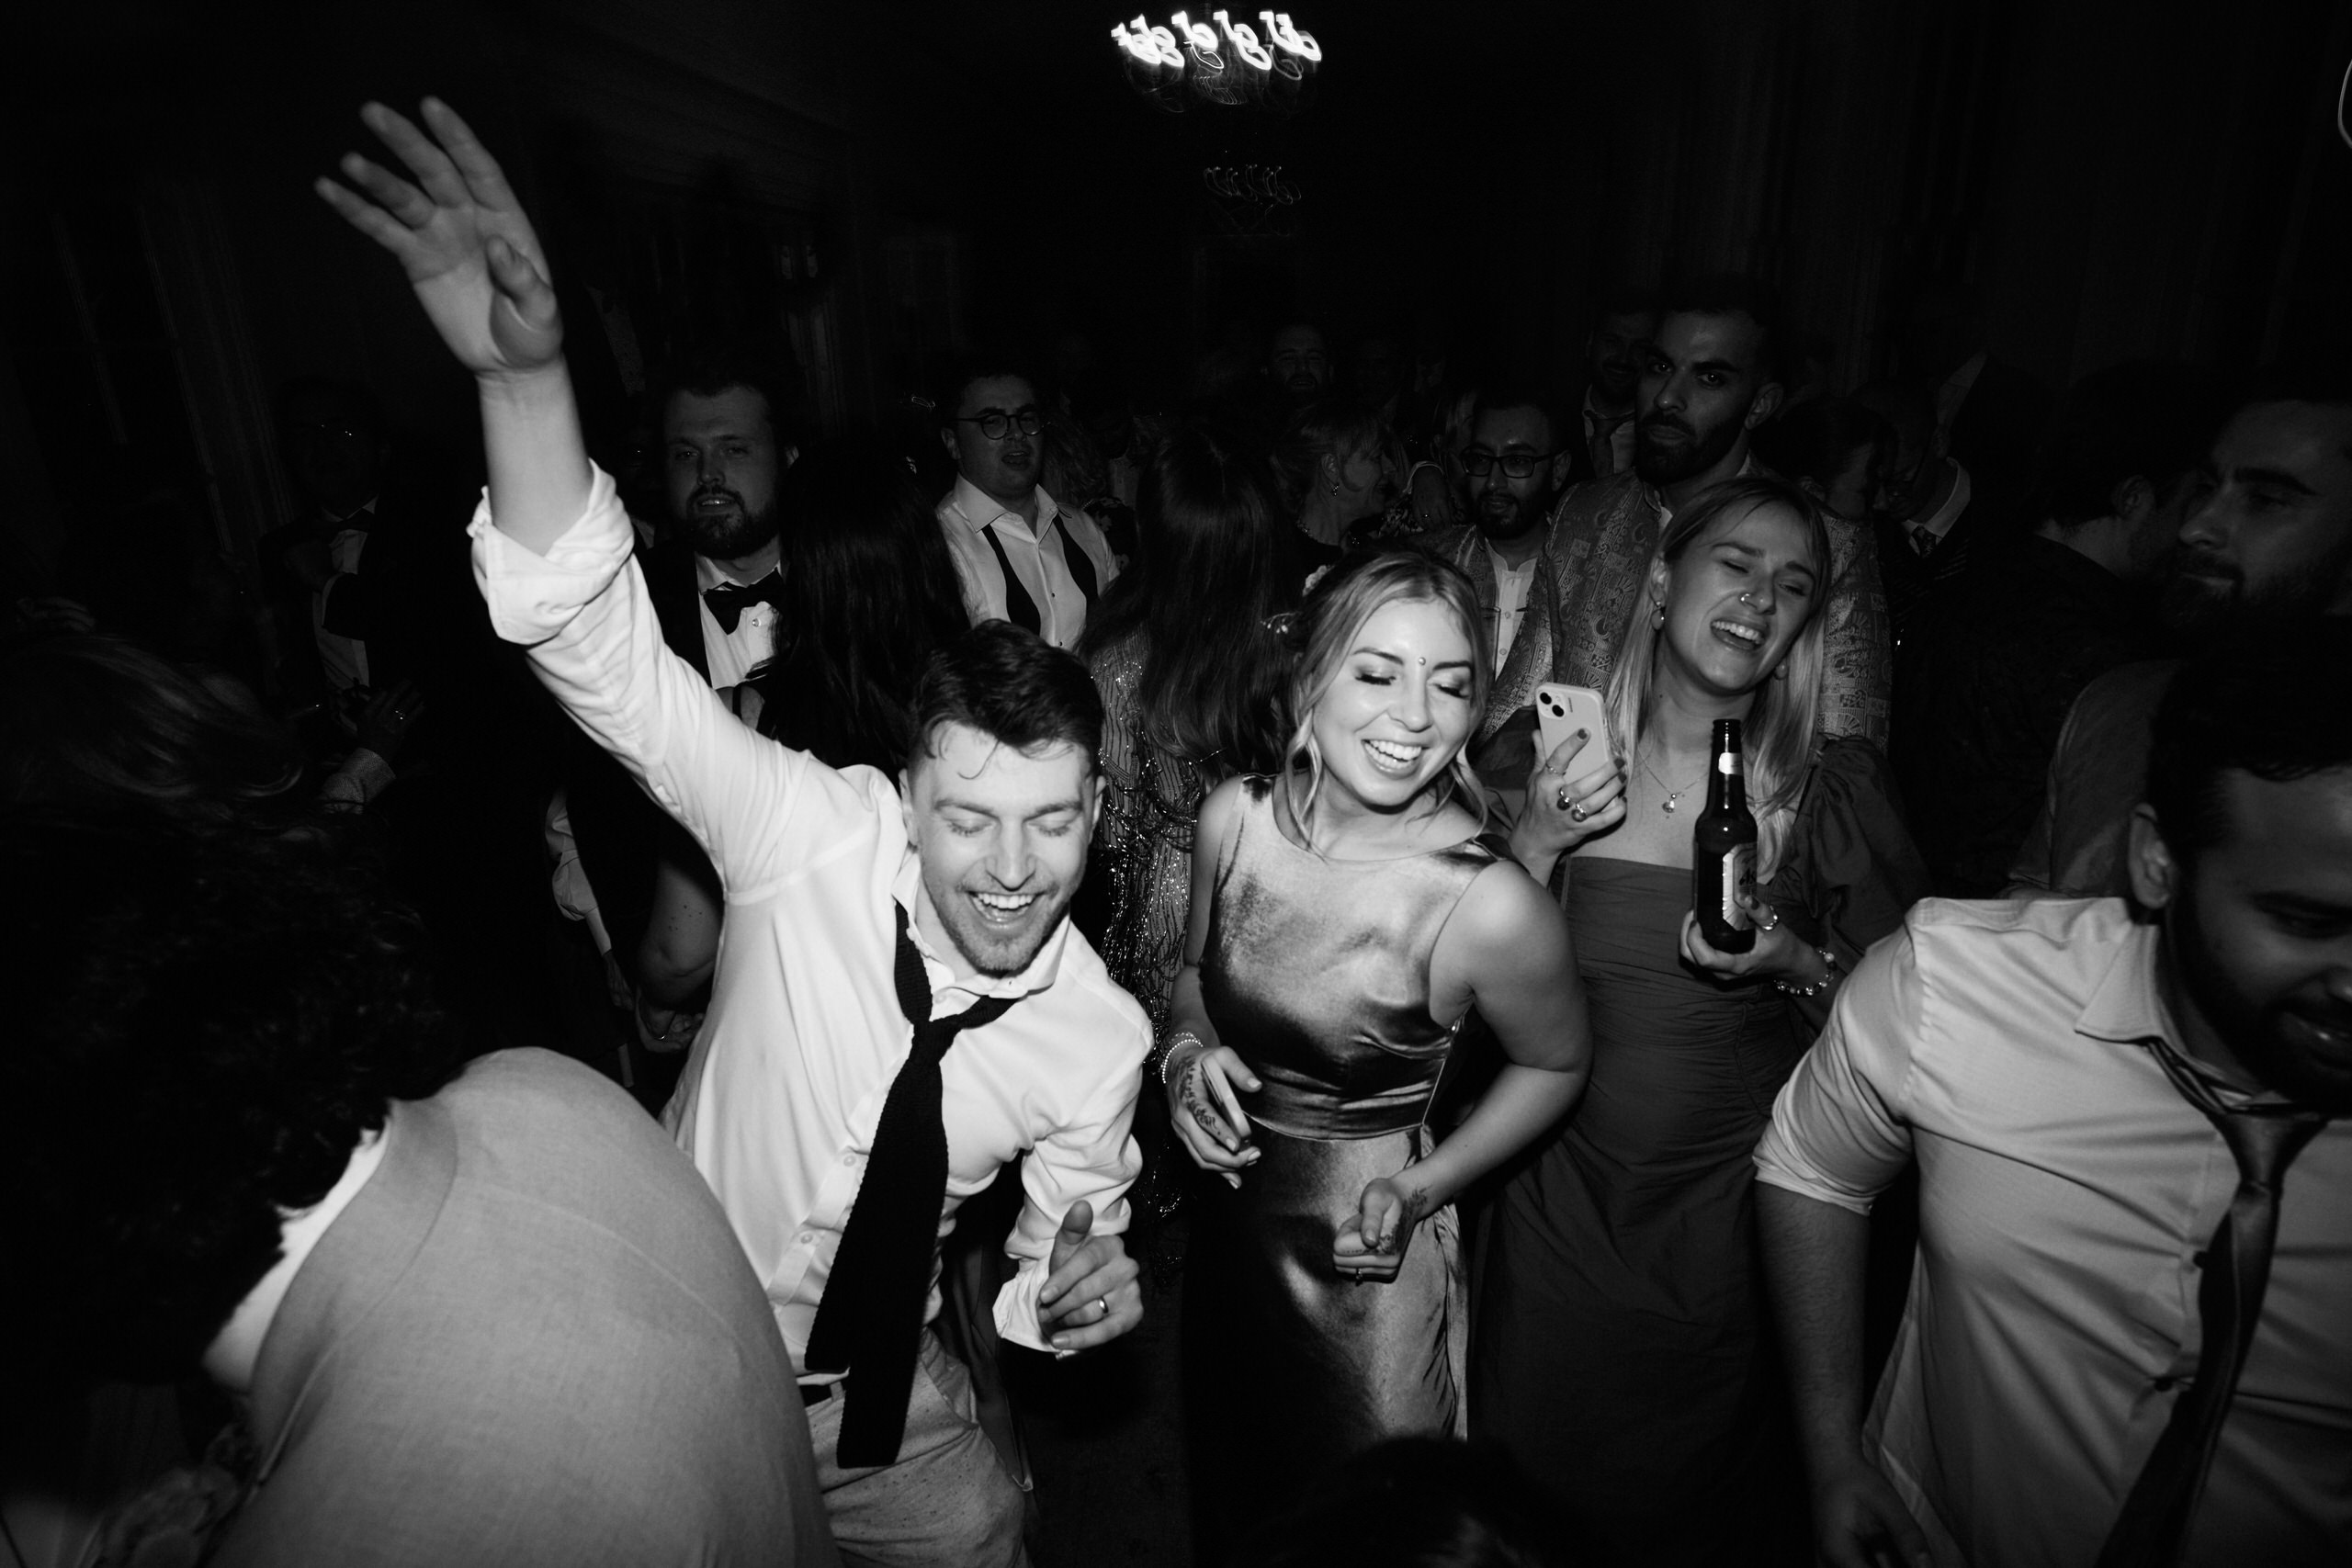 A picture in black and white showing people dancing at a party.